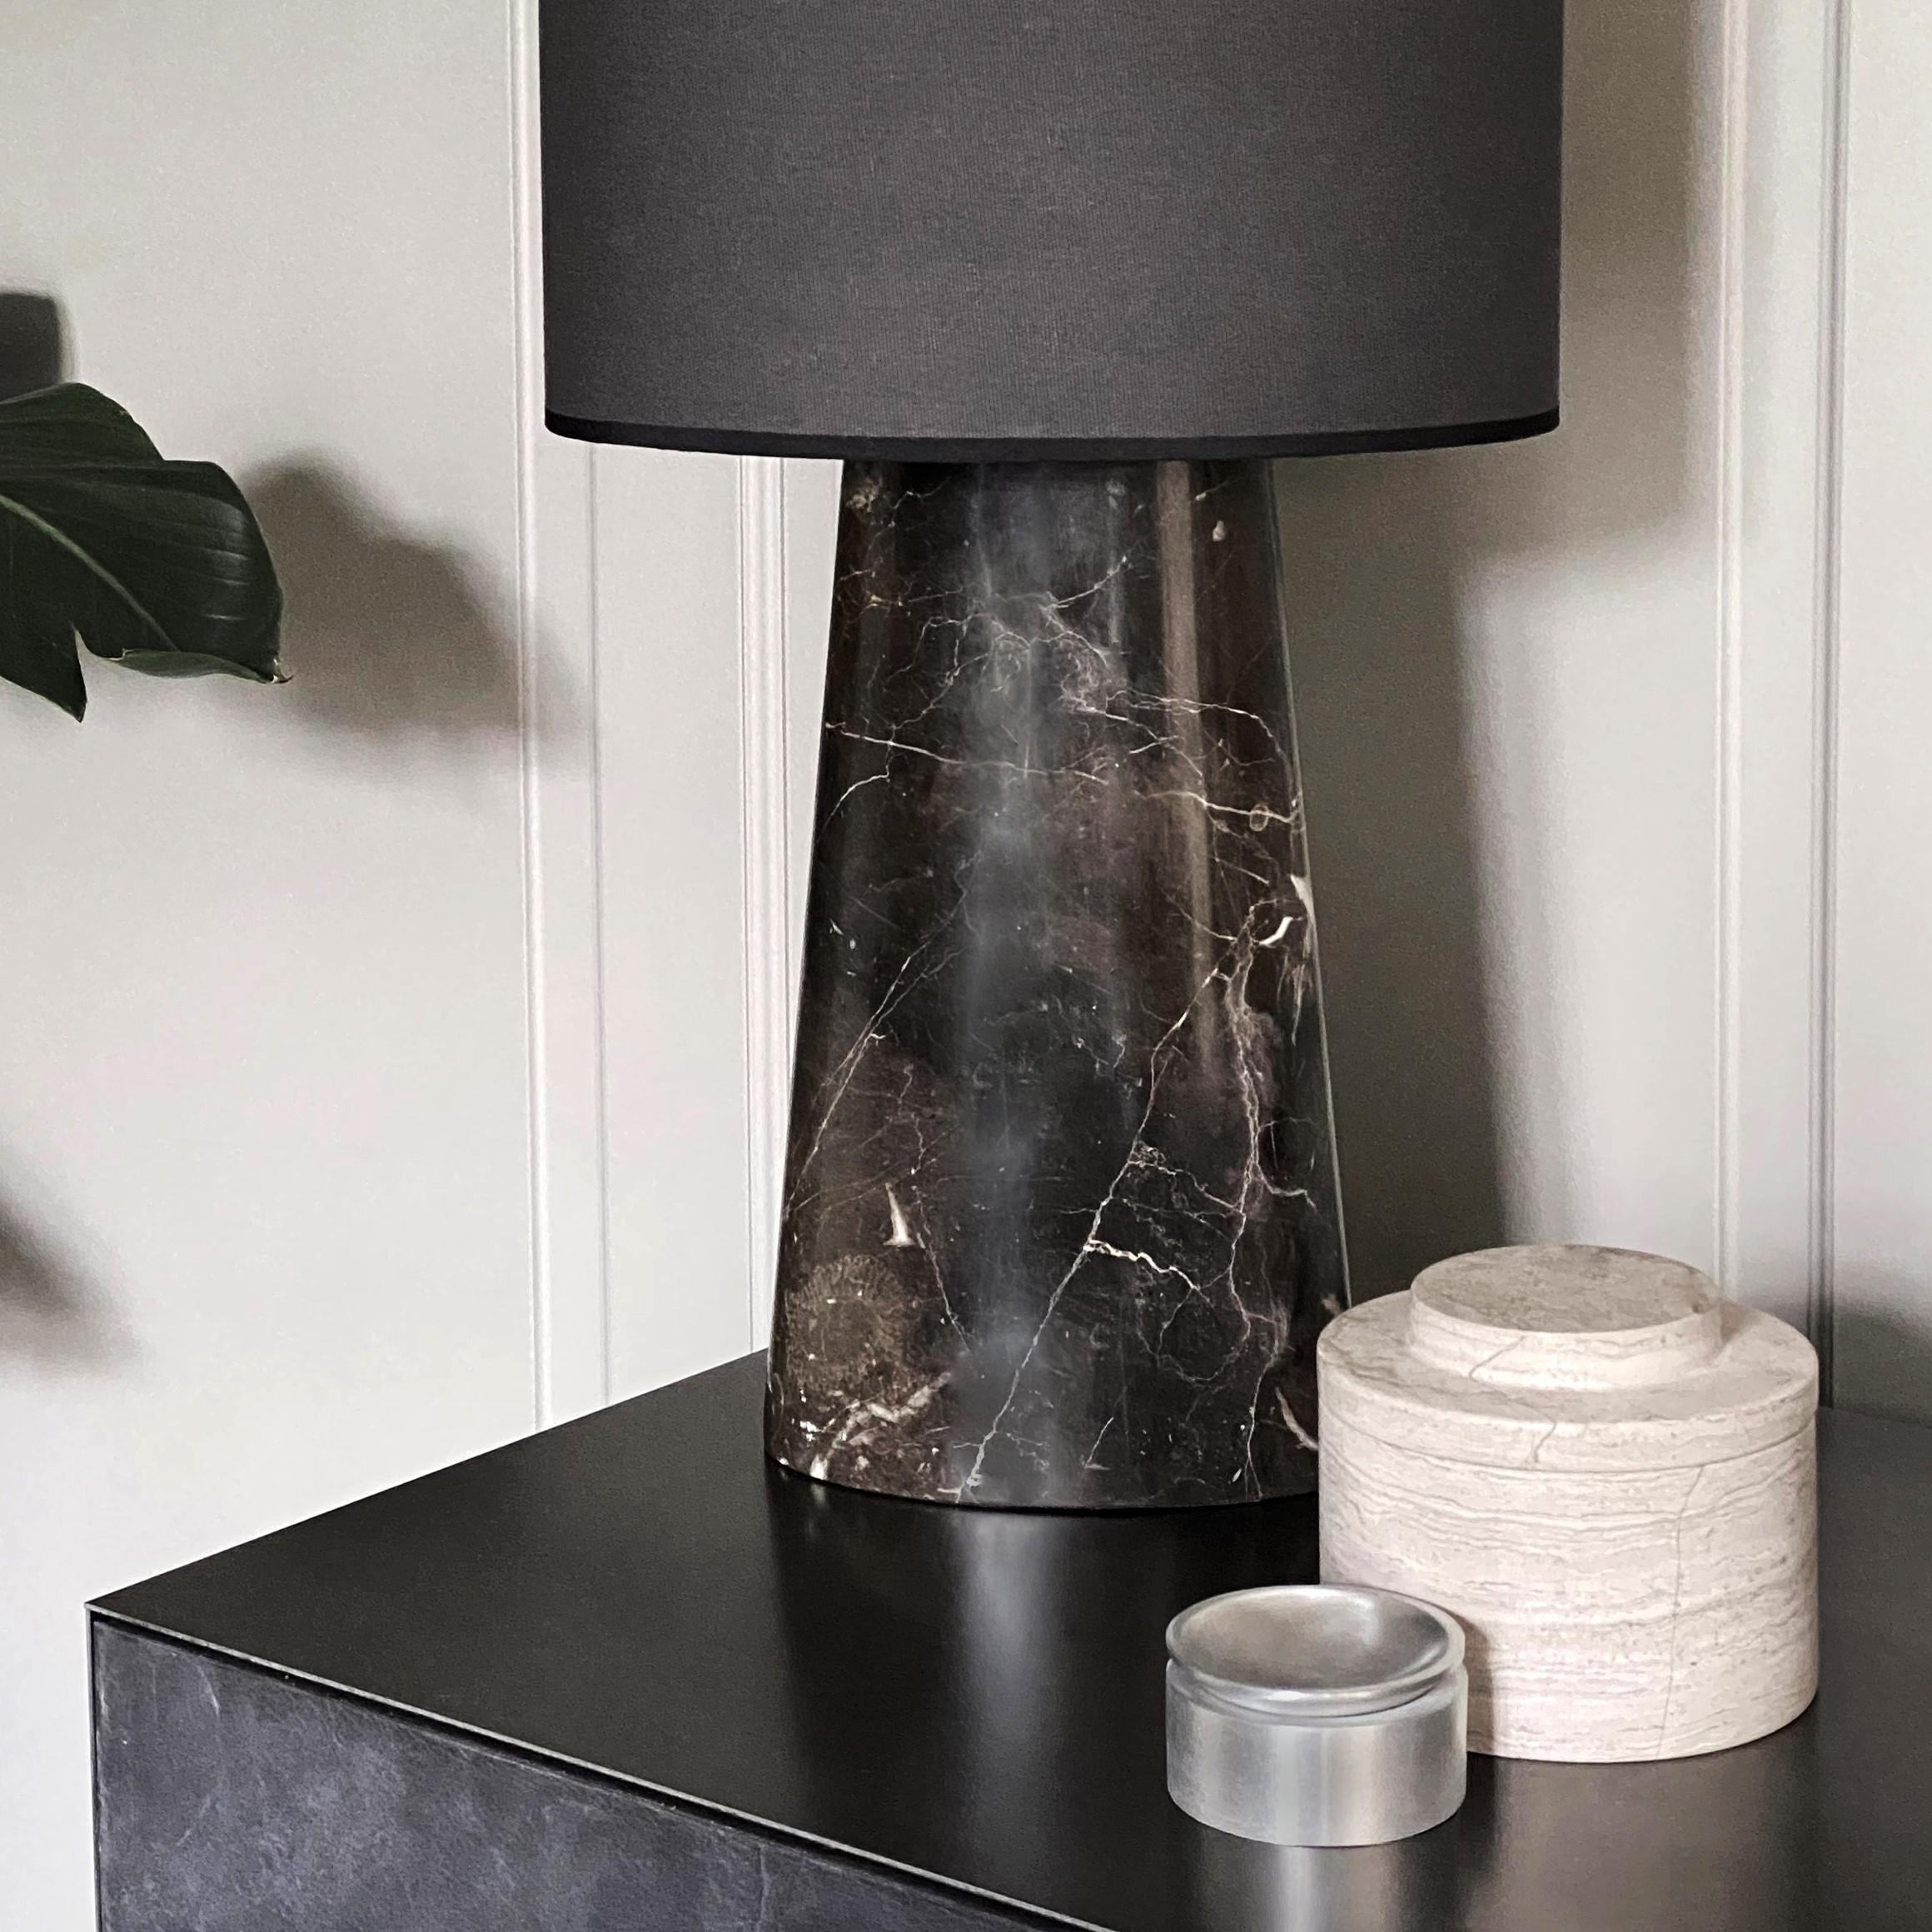 AURA Canister in the colour Chalk Grey is a beautiful marble jar or canister with a lid. The canister has an exclusive and timeless look that adorns all spaces. Because the marble is a natural stone, the colour and structure can vary a little. The